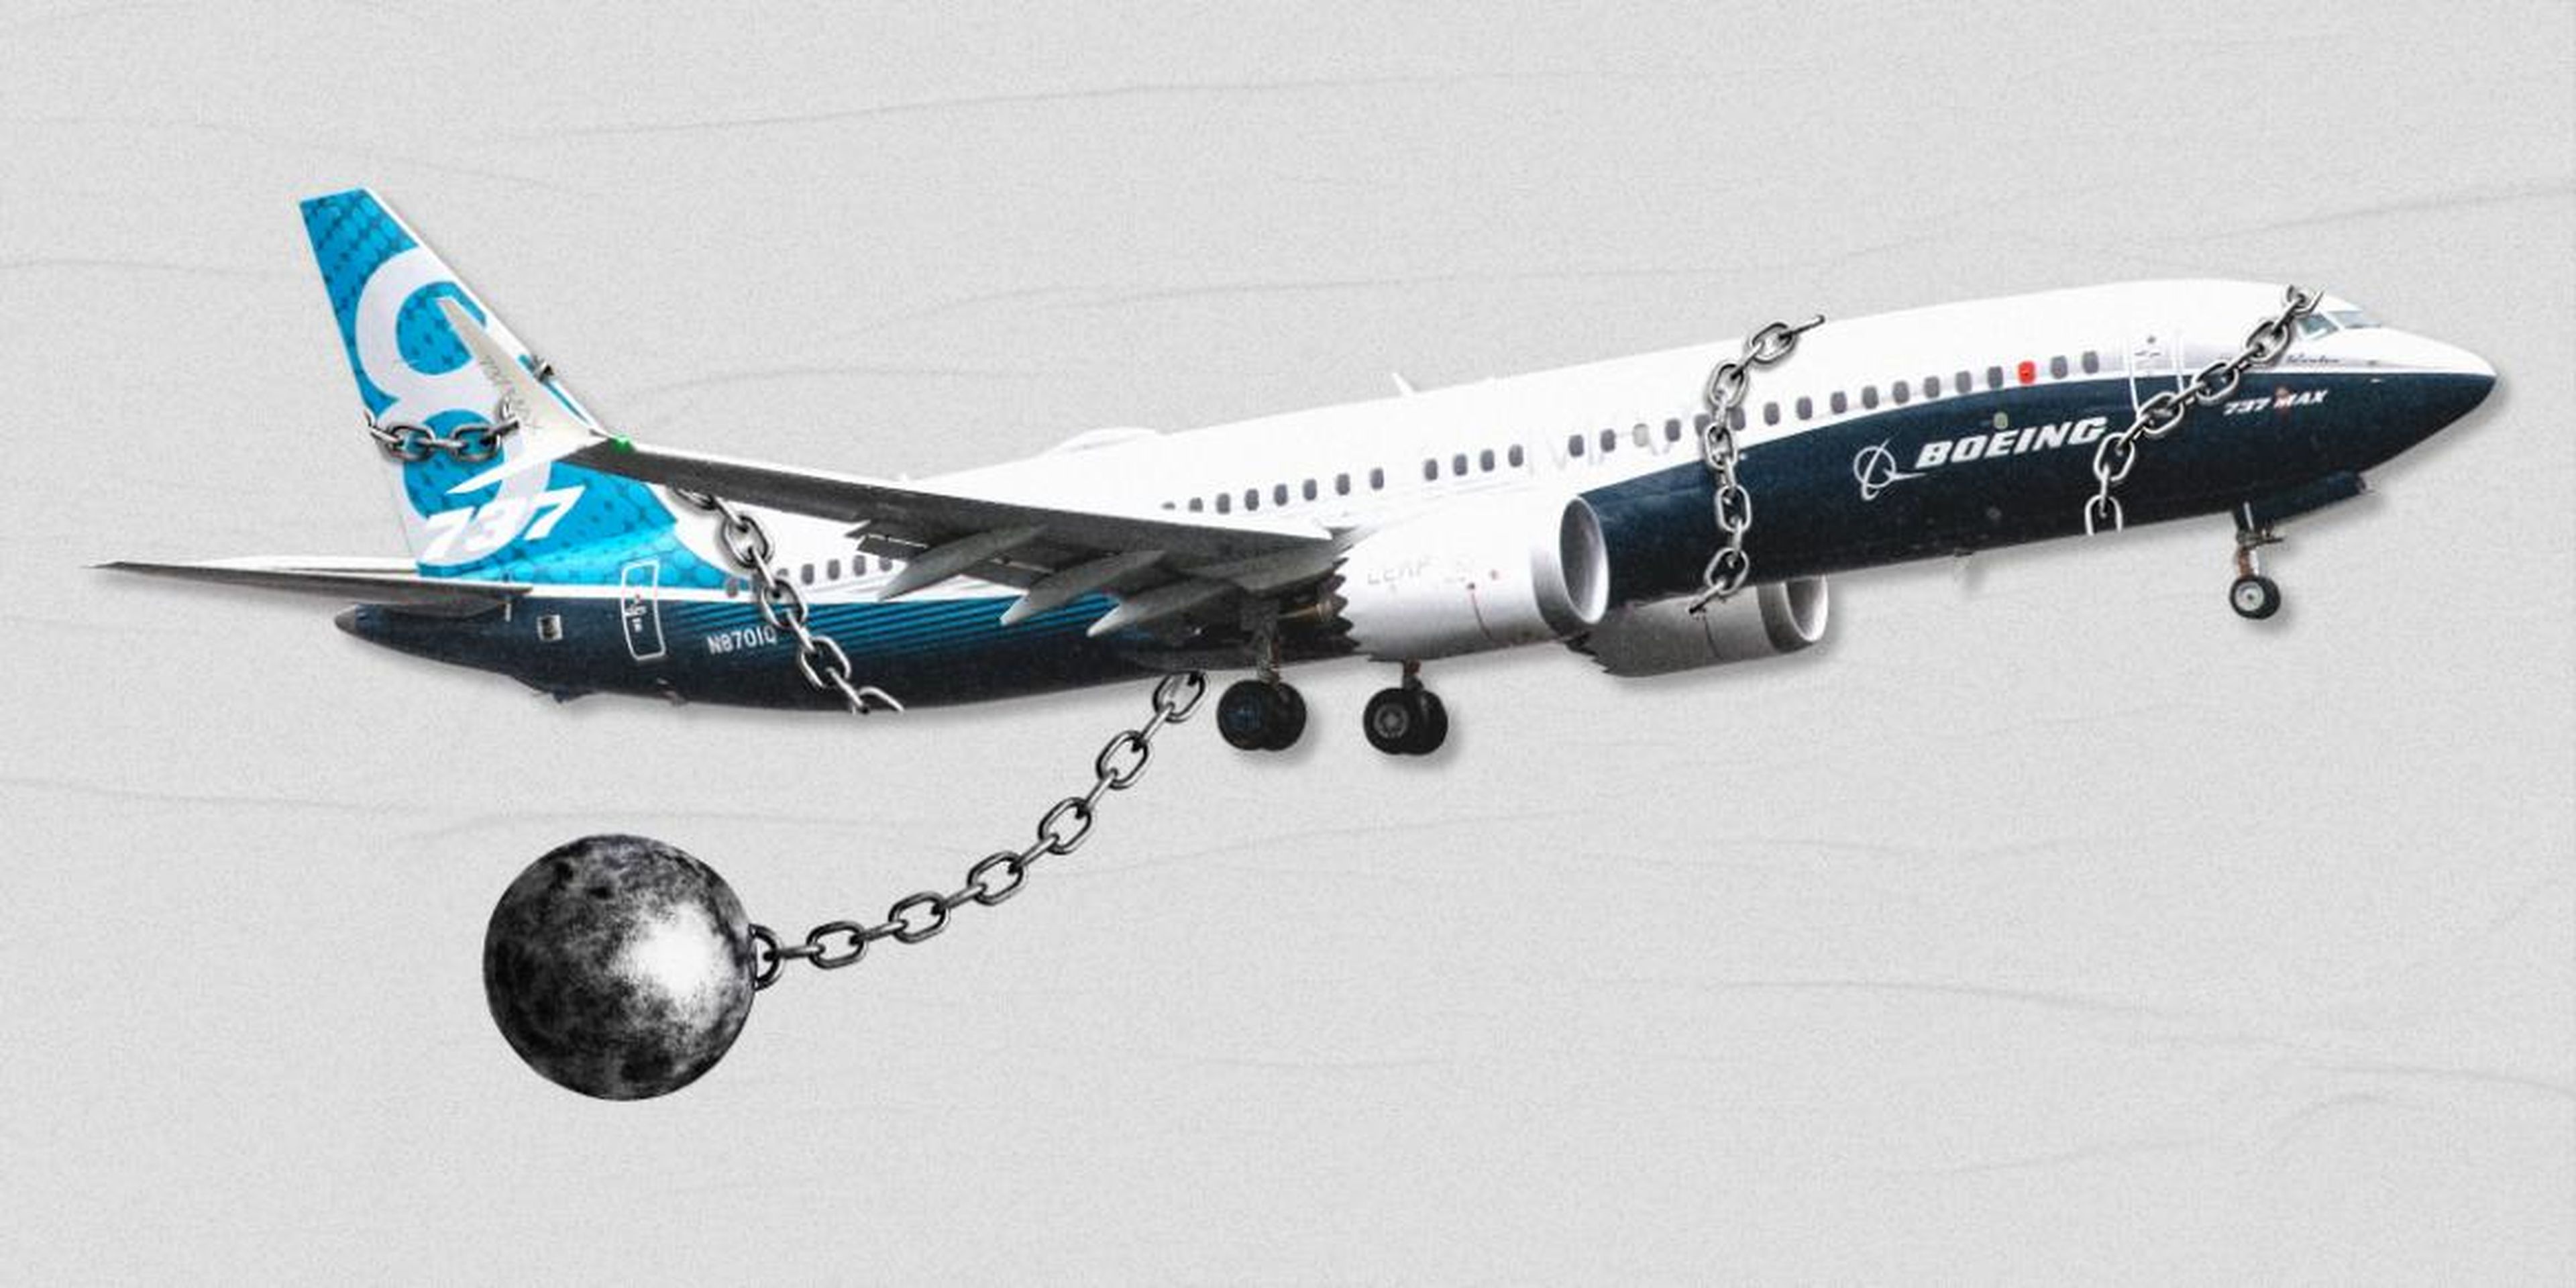 In a series of interviews with Business Insider, numerous experts have questioned Boeing's handling of the 737 Max crisis.